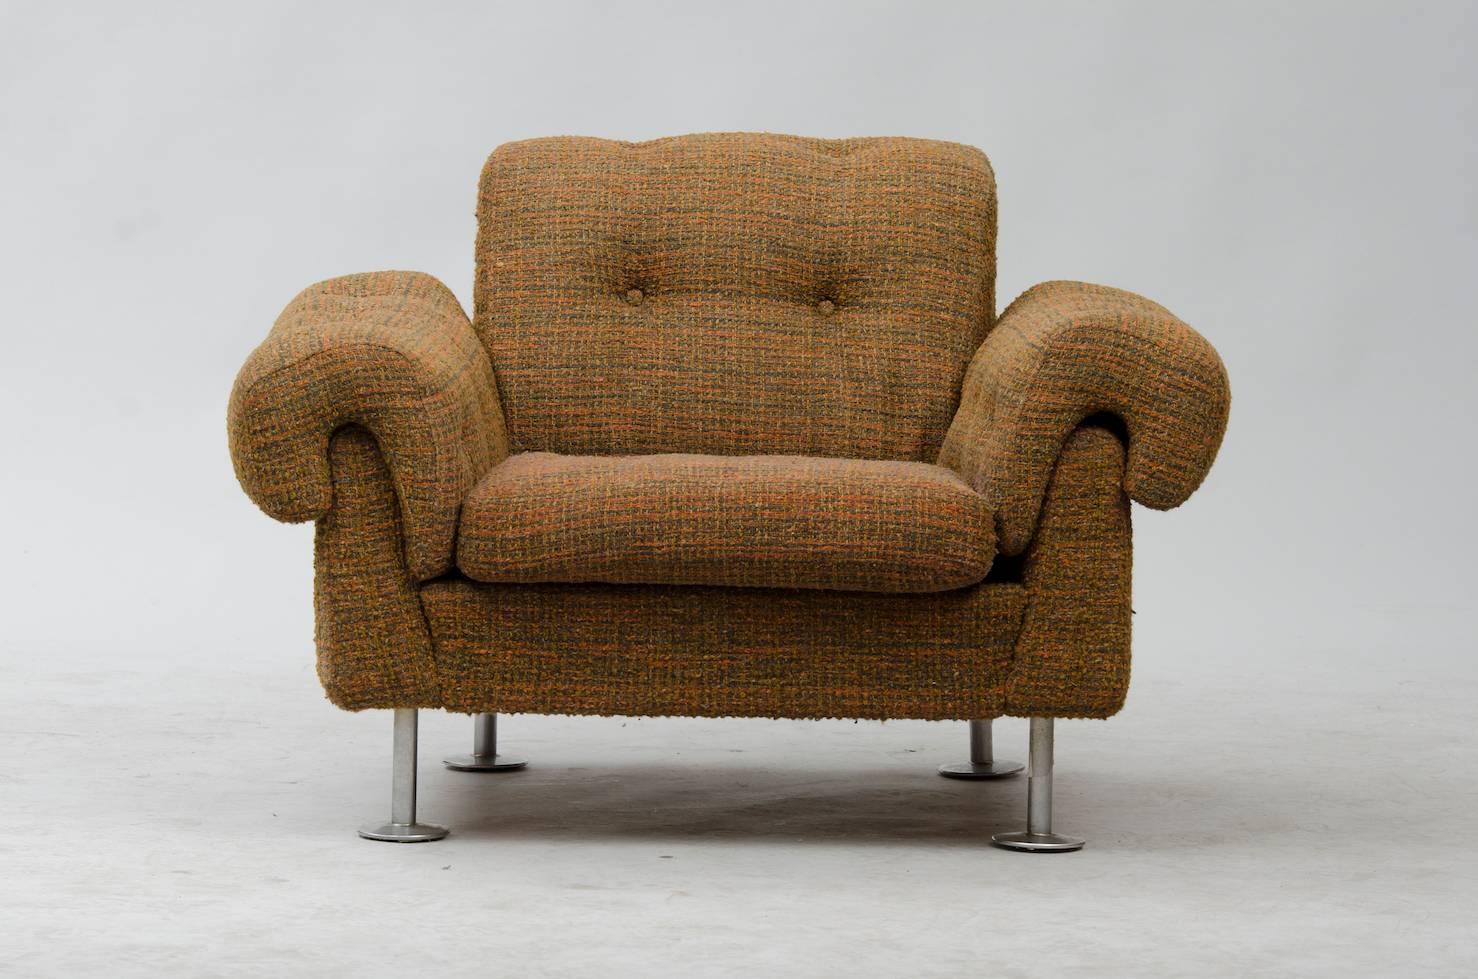 A fabric and brushed stainless steel, armchair.
We have a large stock of unrestored pieces and we decided to publish it, the price shown is in the original condition.
We have our own workshop and we can restore these items, including upholstery